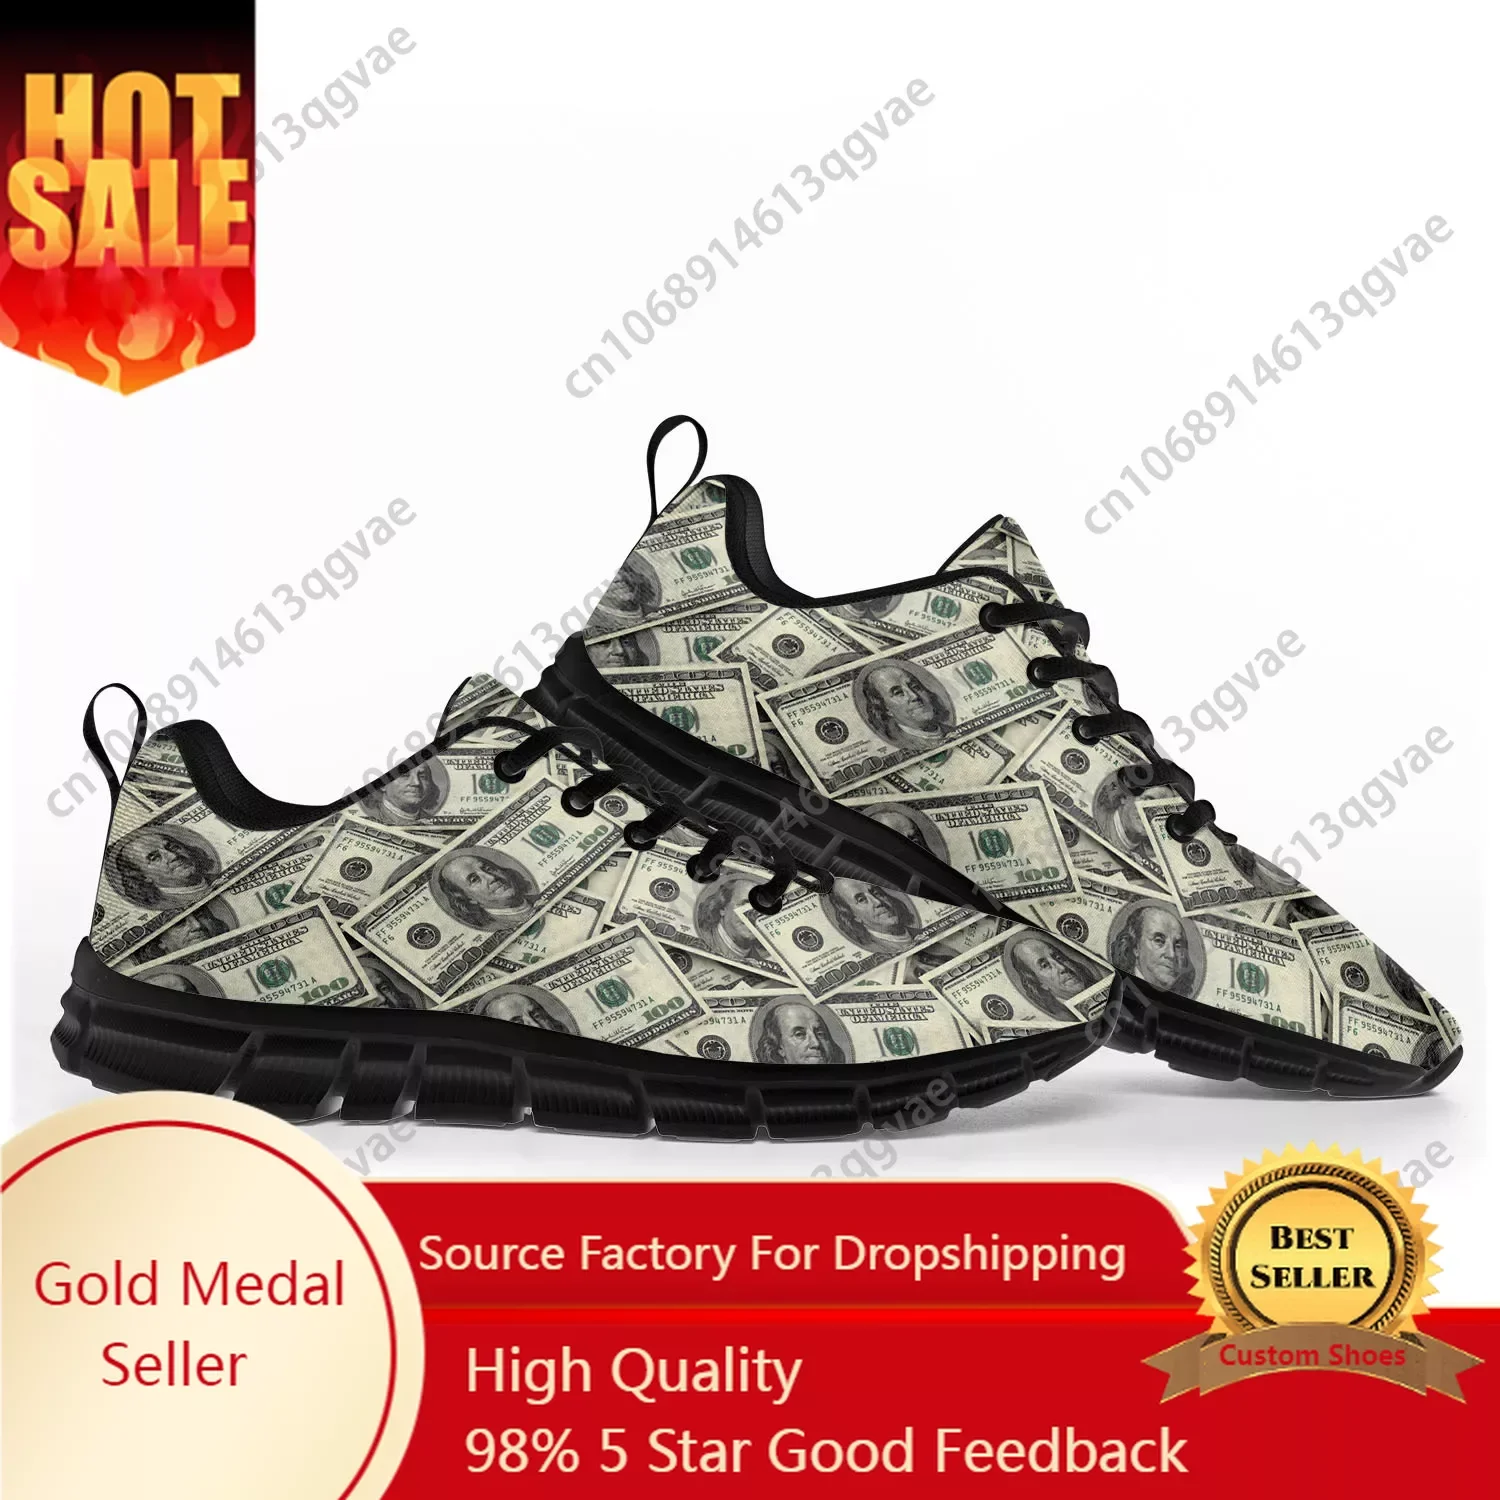 Dollar Printed Popular Sports Shoes Mens Womens Teenager Kids Children Sneakers Casual Custom High Quality Couple Shoes Black popular style couple long sleeve hoodies yaoi bl given printed hot sale classic clothes casual cotton high quality hip pop wears